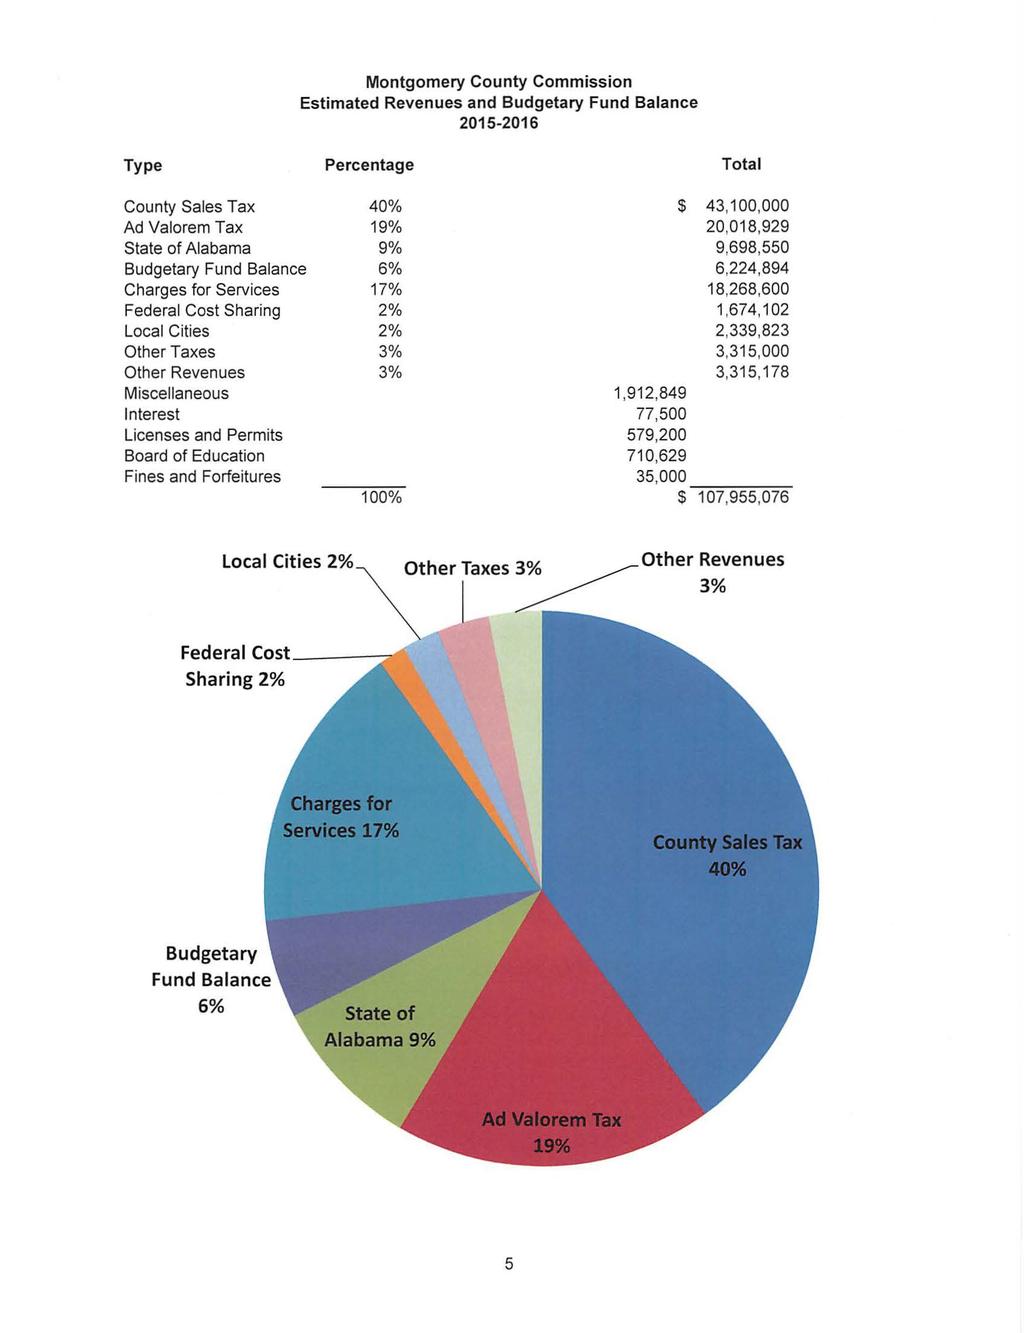 Type Montgomery County Commission Estimated Revenues and Budgetary Fund Balance 2015-2016 Percentage Total County Sales Tax Ad Valorem Tax State of Alabama 40% 19% 9% Budgetary Fund Balance 6%